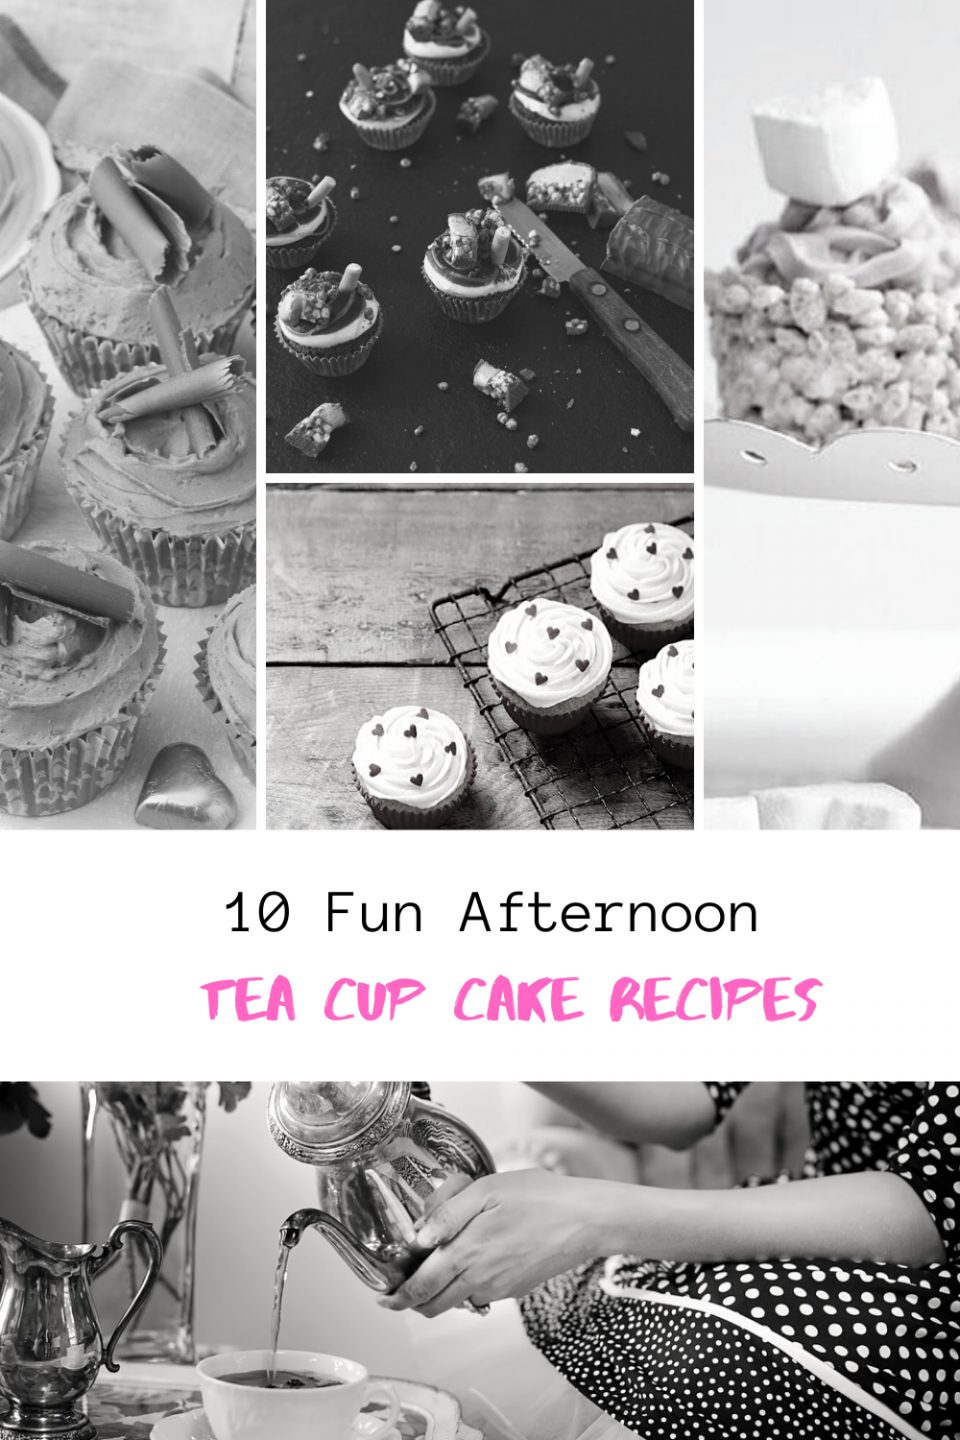 10 Fun Afternoon Tea Cupcake Recipes To Try Out